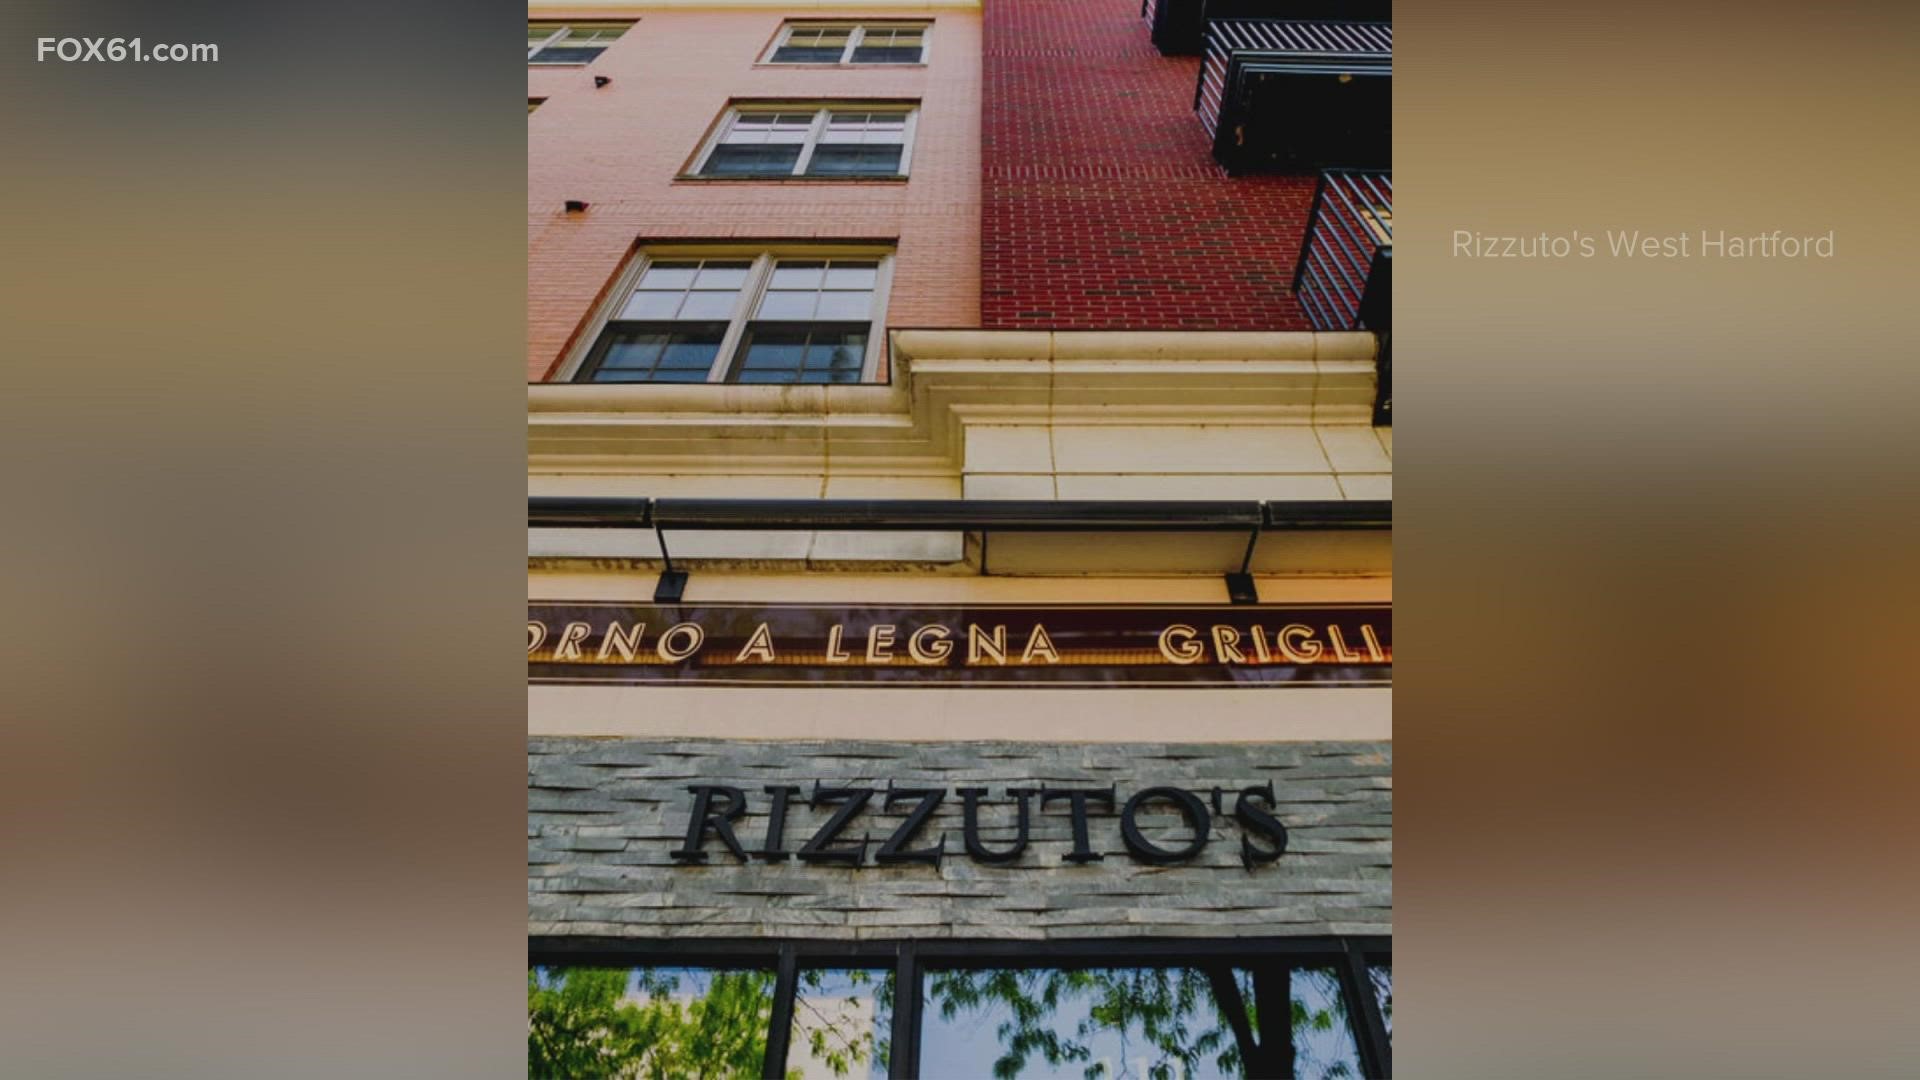 Rizzuto's in West Hartford has closed; This does not affect Rizzuto's Westport.